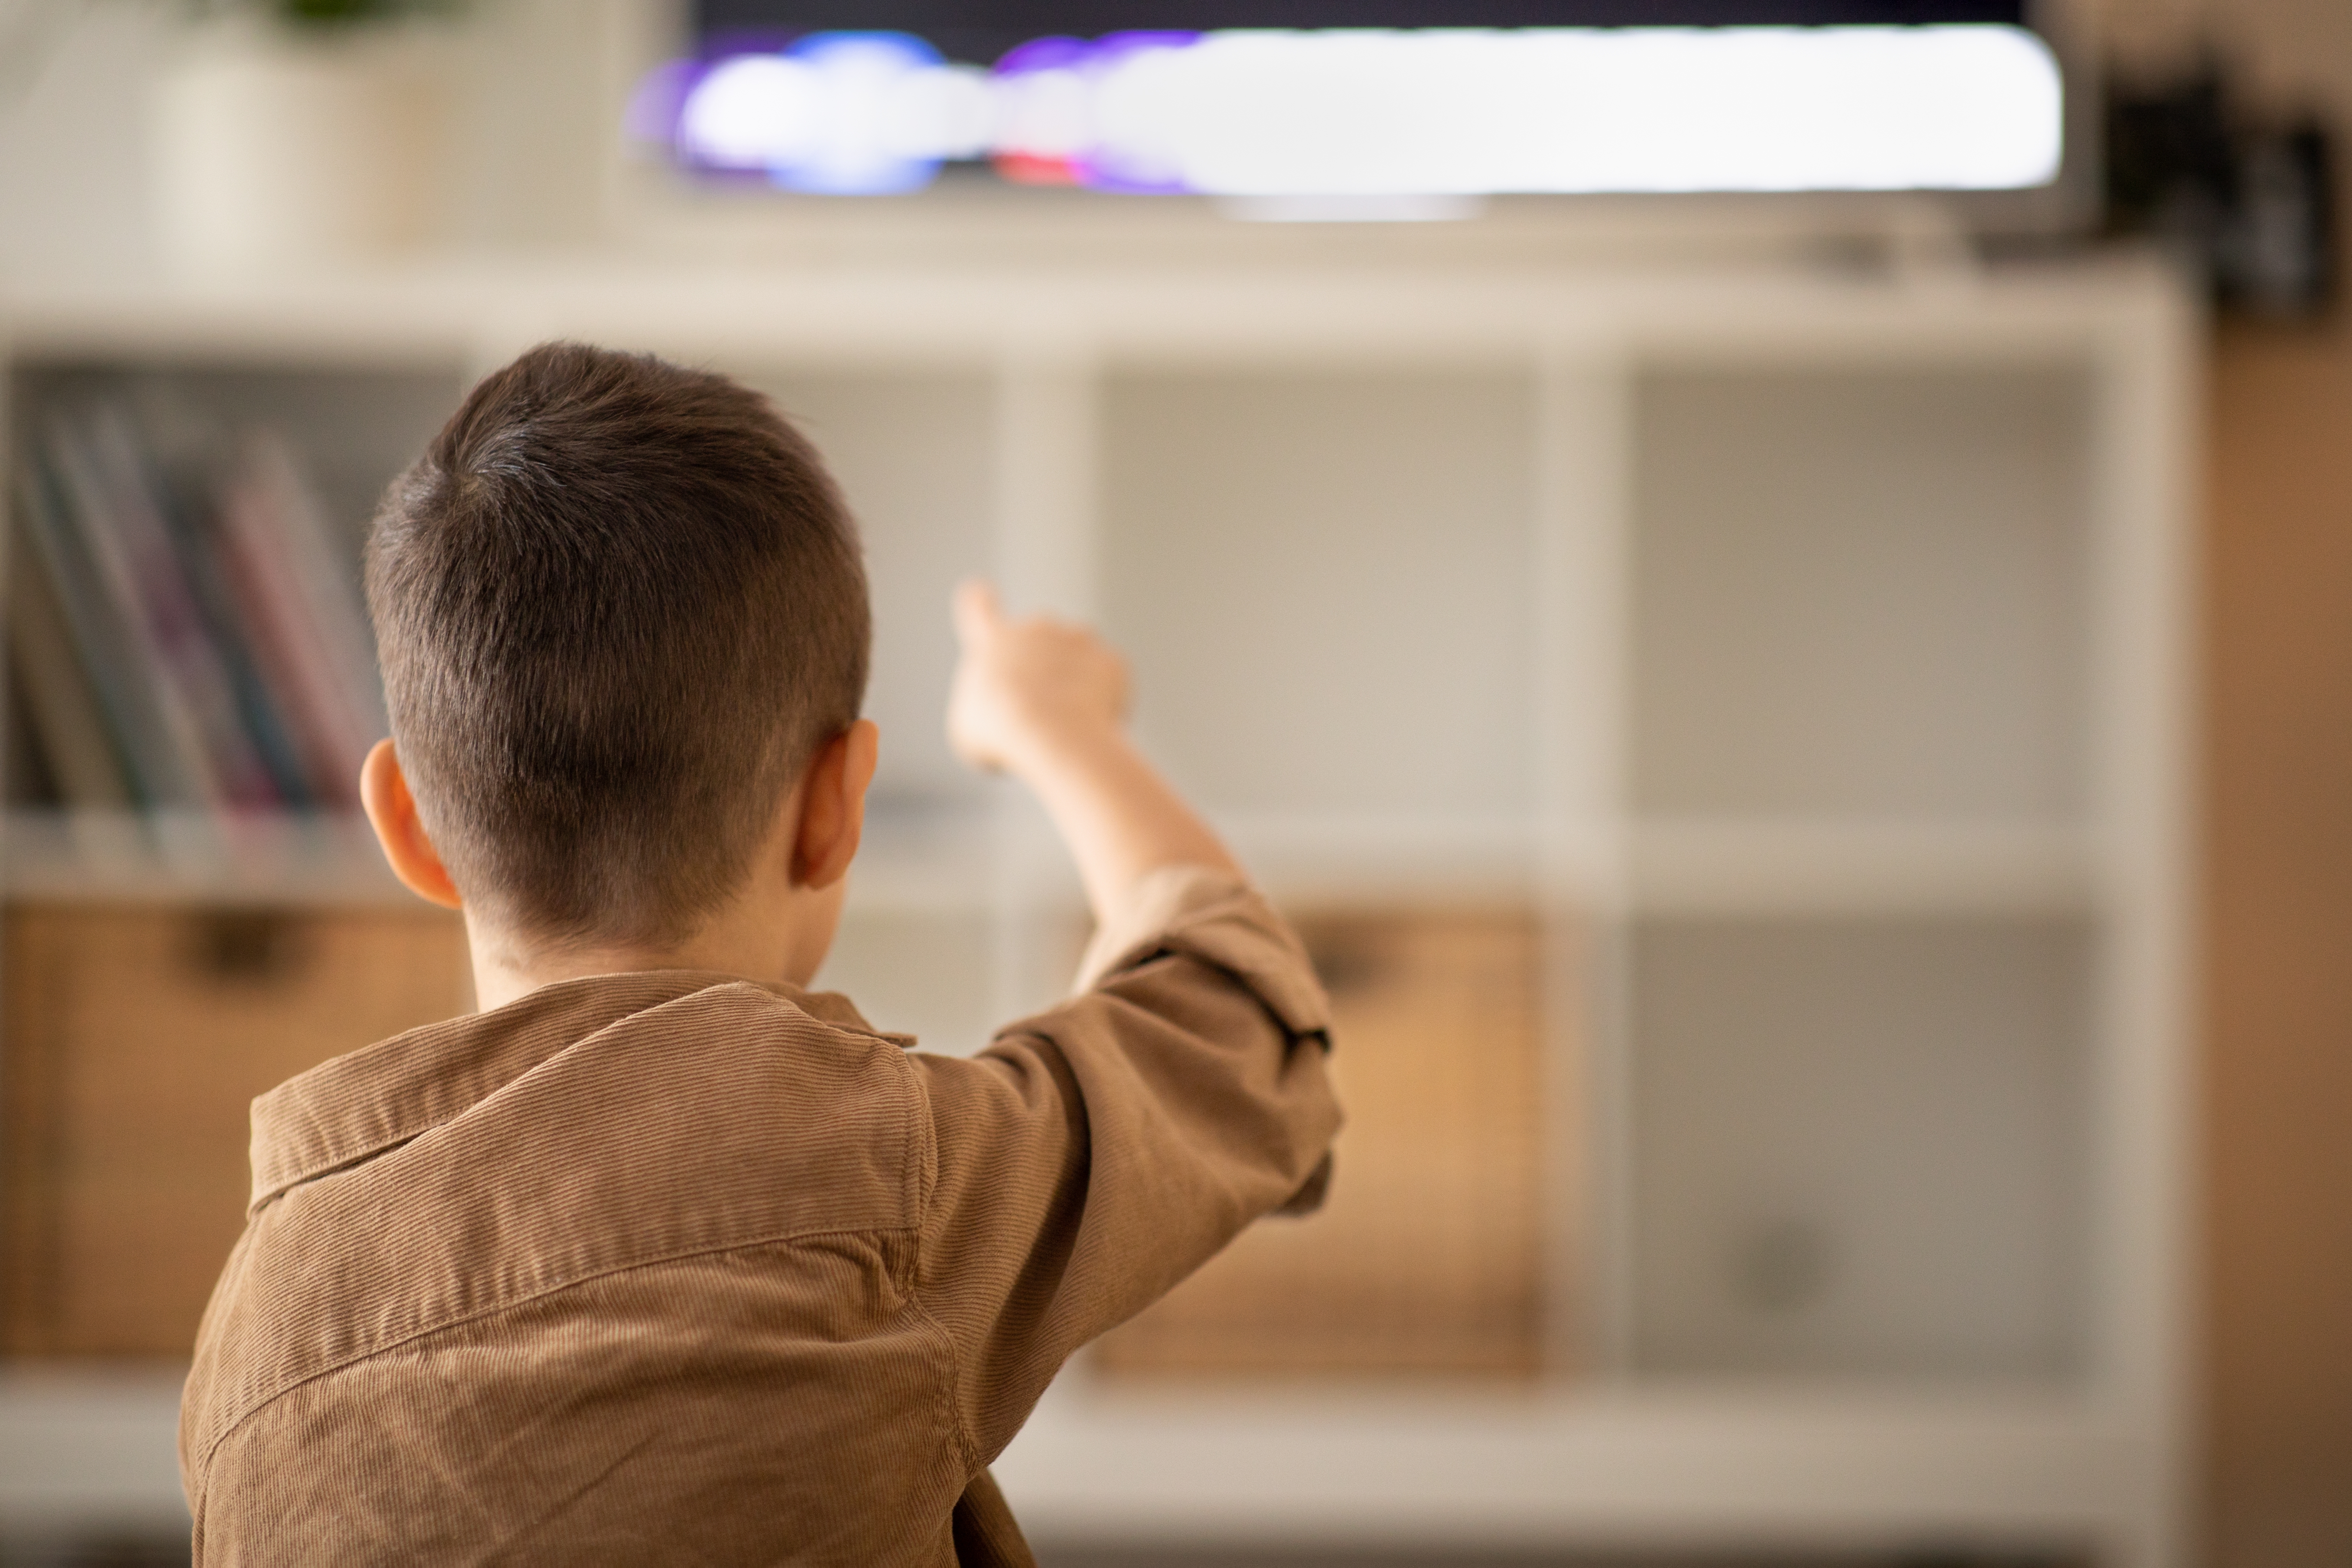 A young kid watching a video, pointing his finger at the TV set | Source: Shutterstock